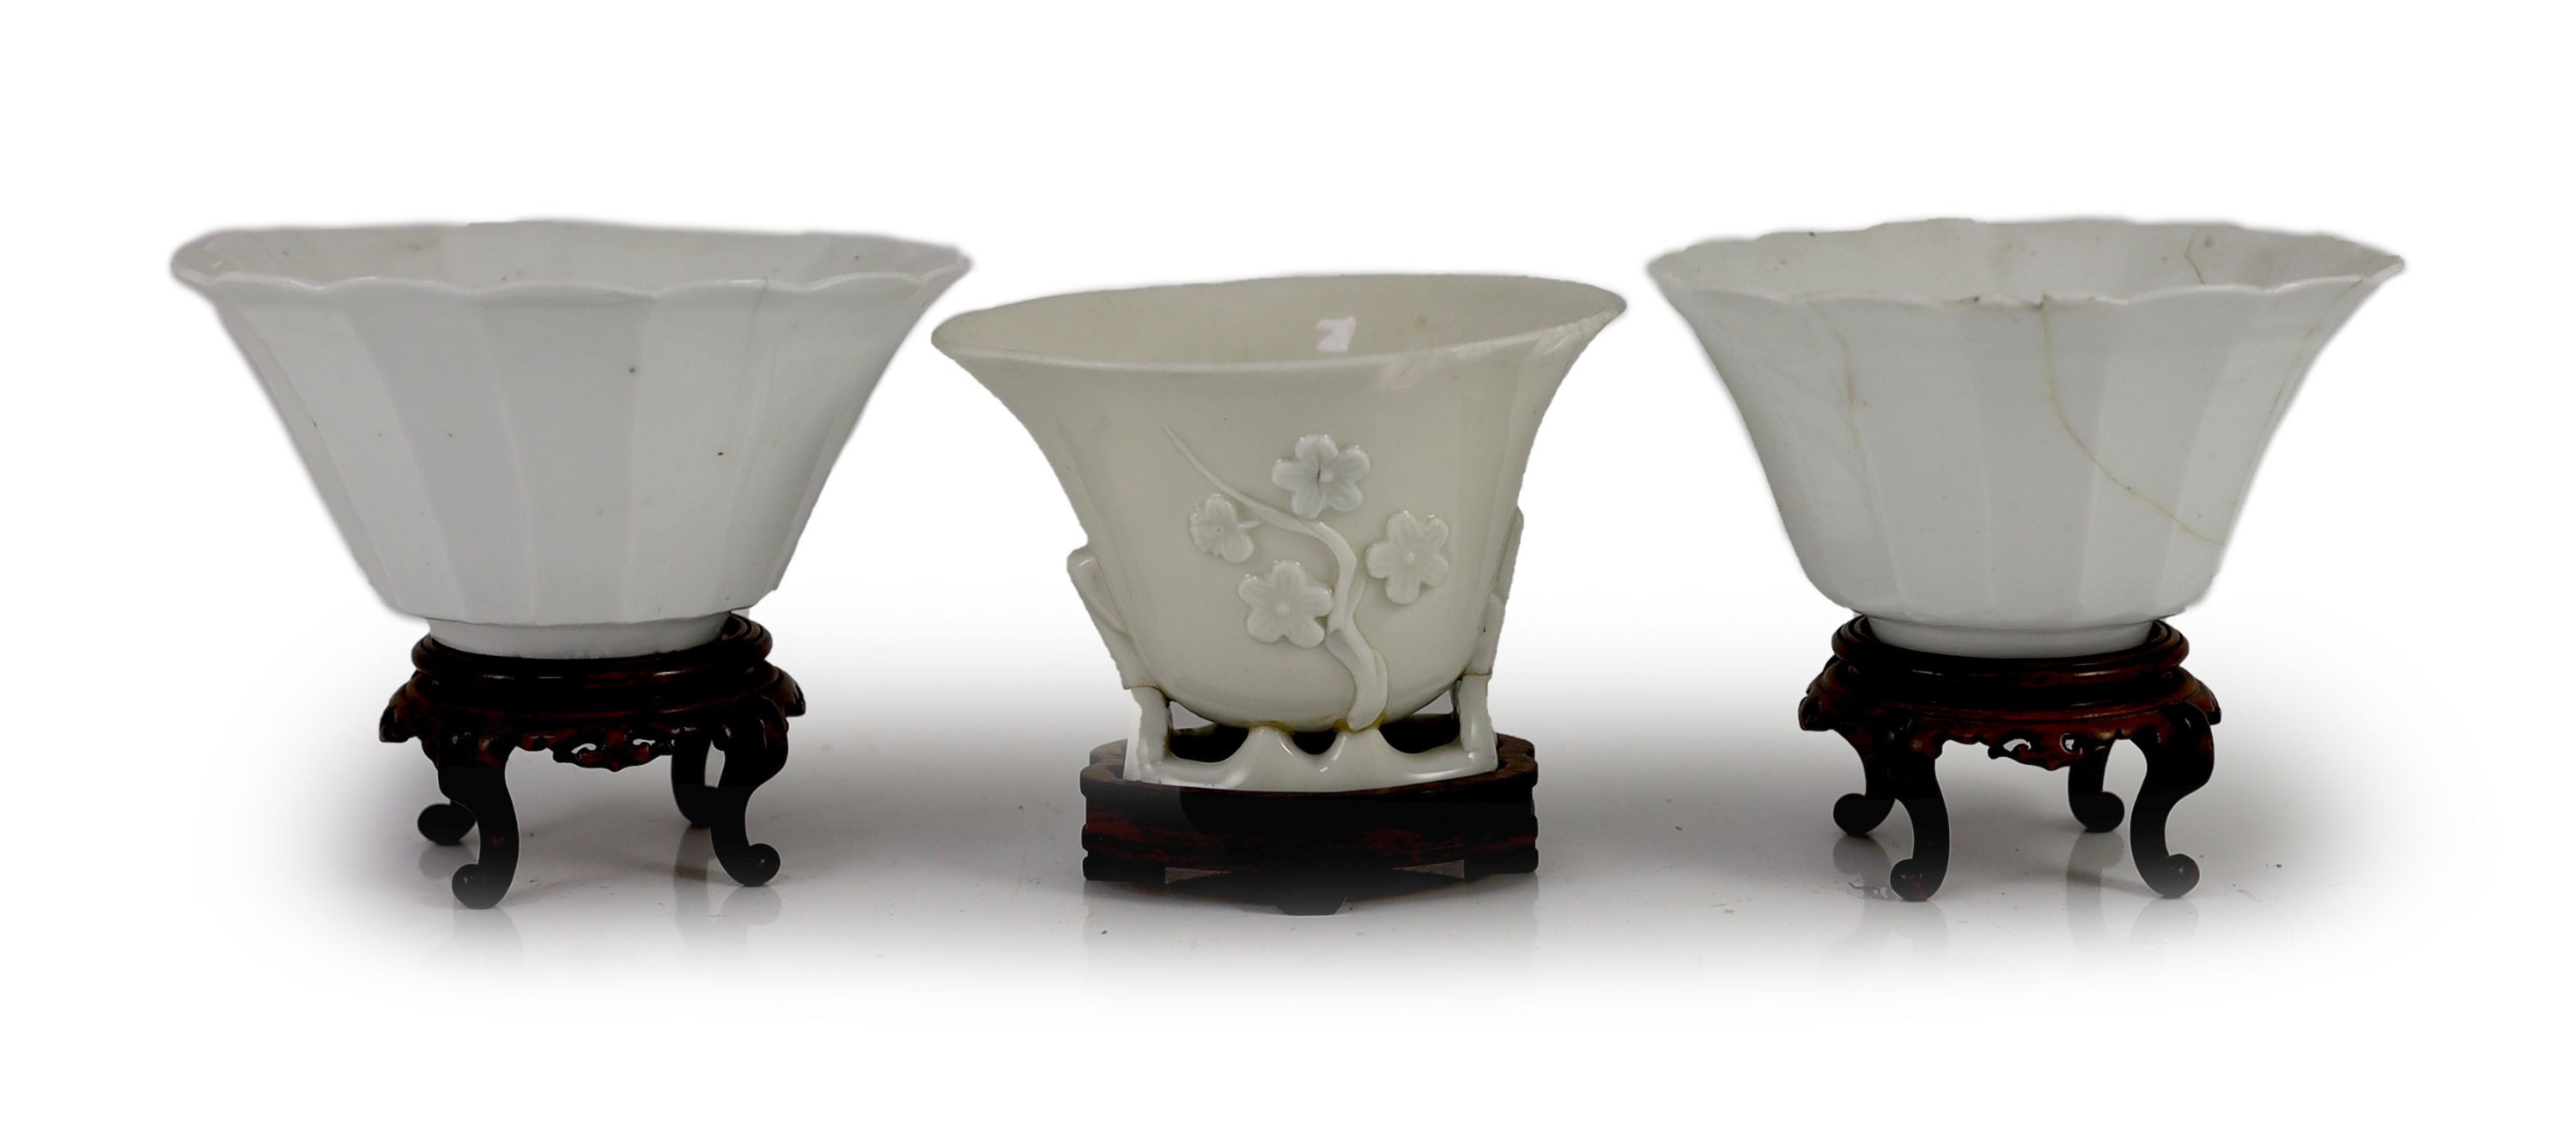 A pair of Chinese blanc-de-chine fluted bowls and a similar libation cup, Dehua kilns, 17th century, 6.5cm high & 7.5cm wood stands, damage